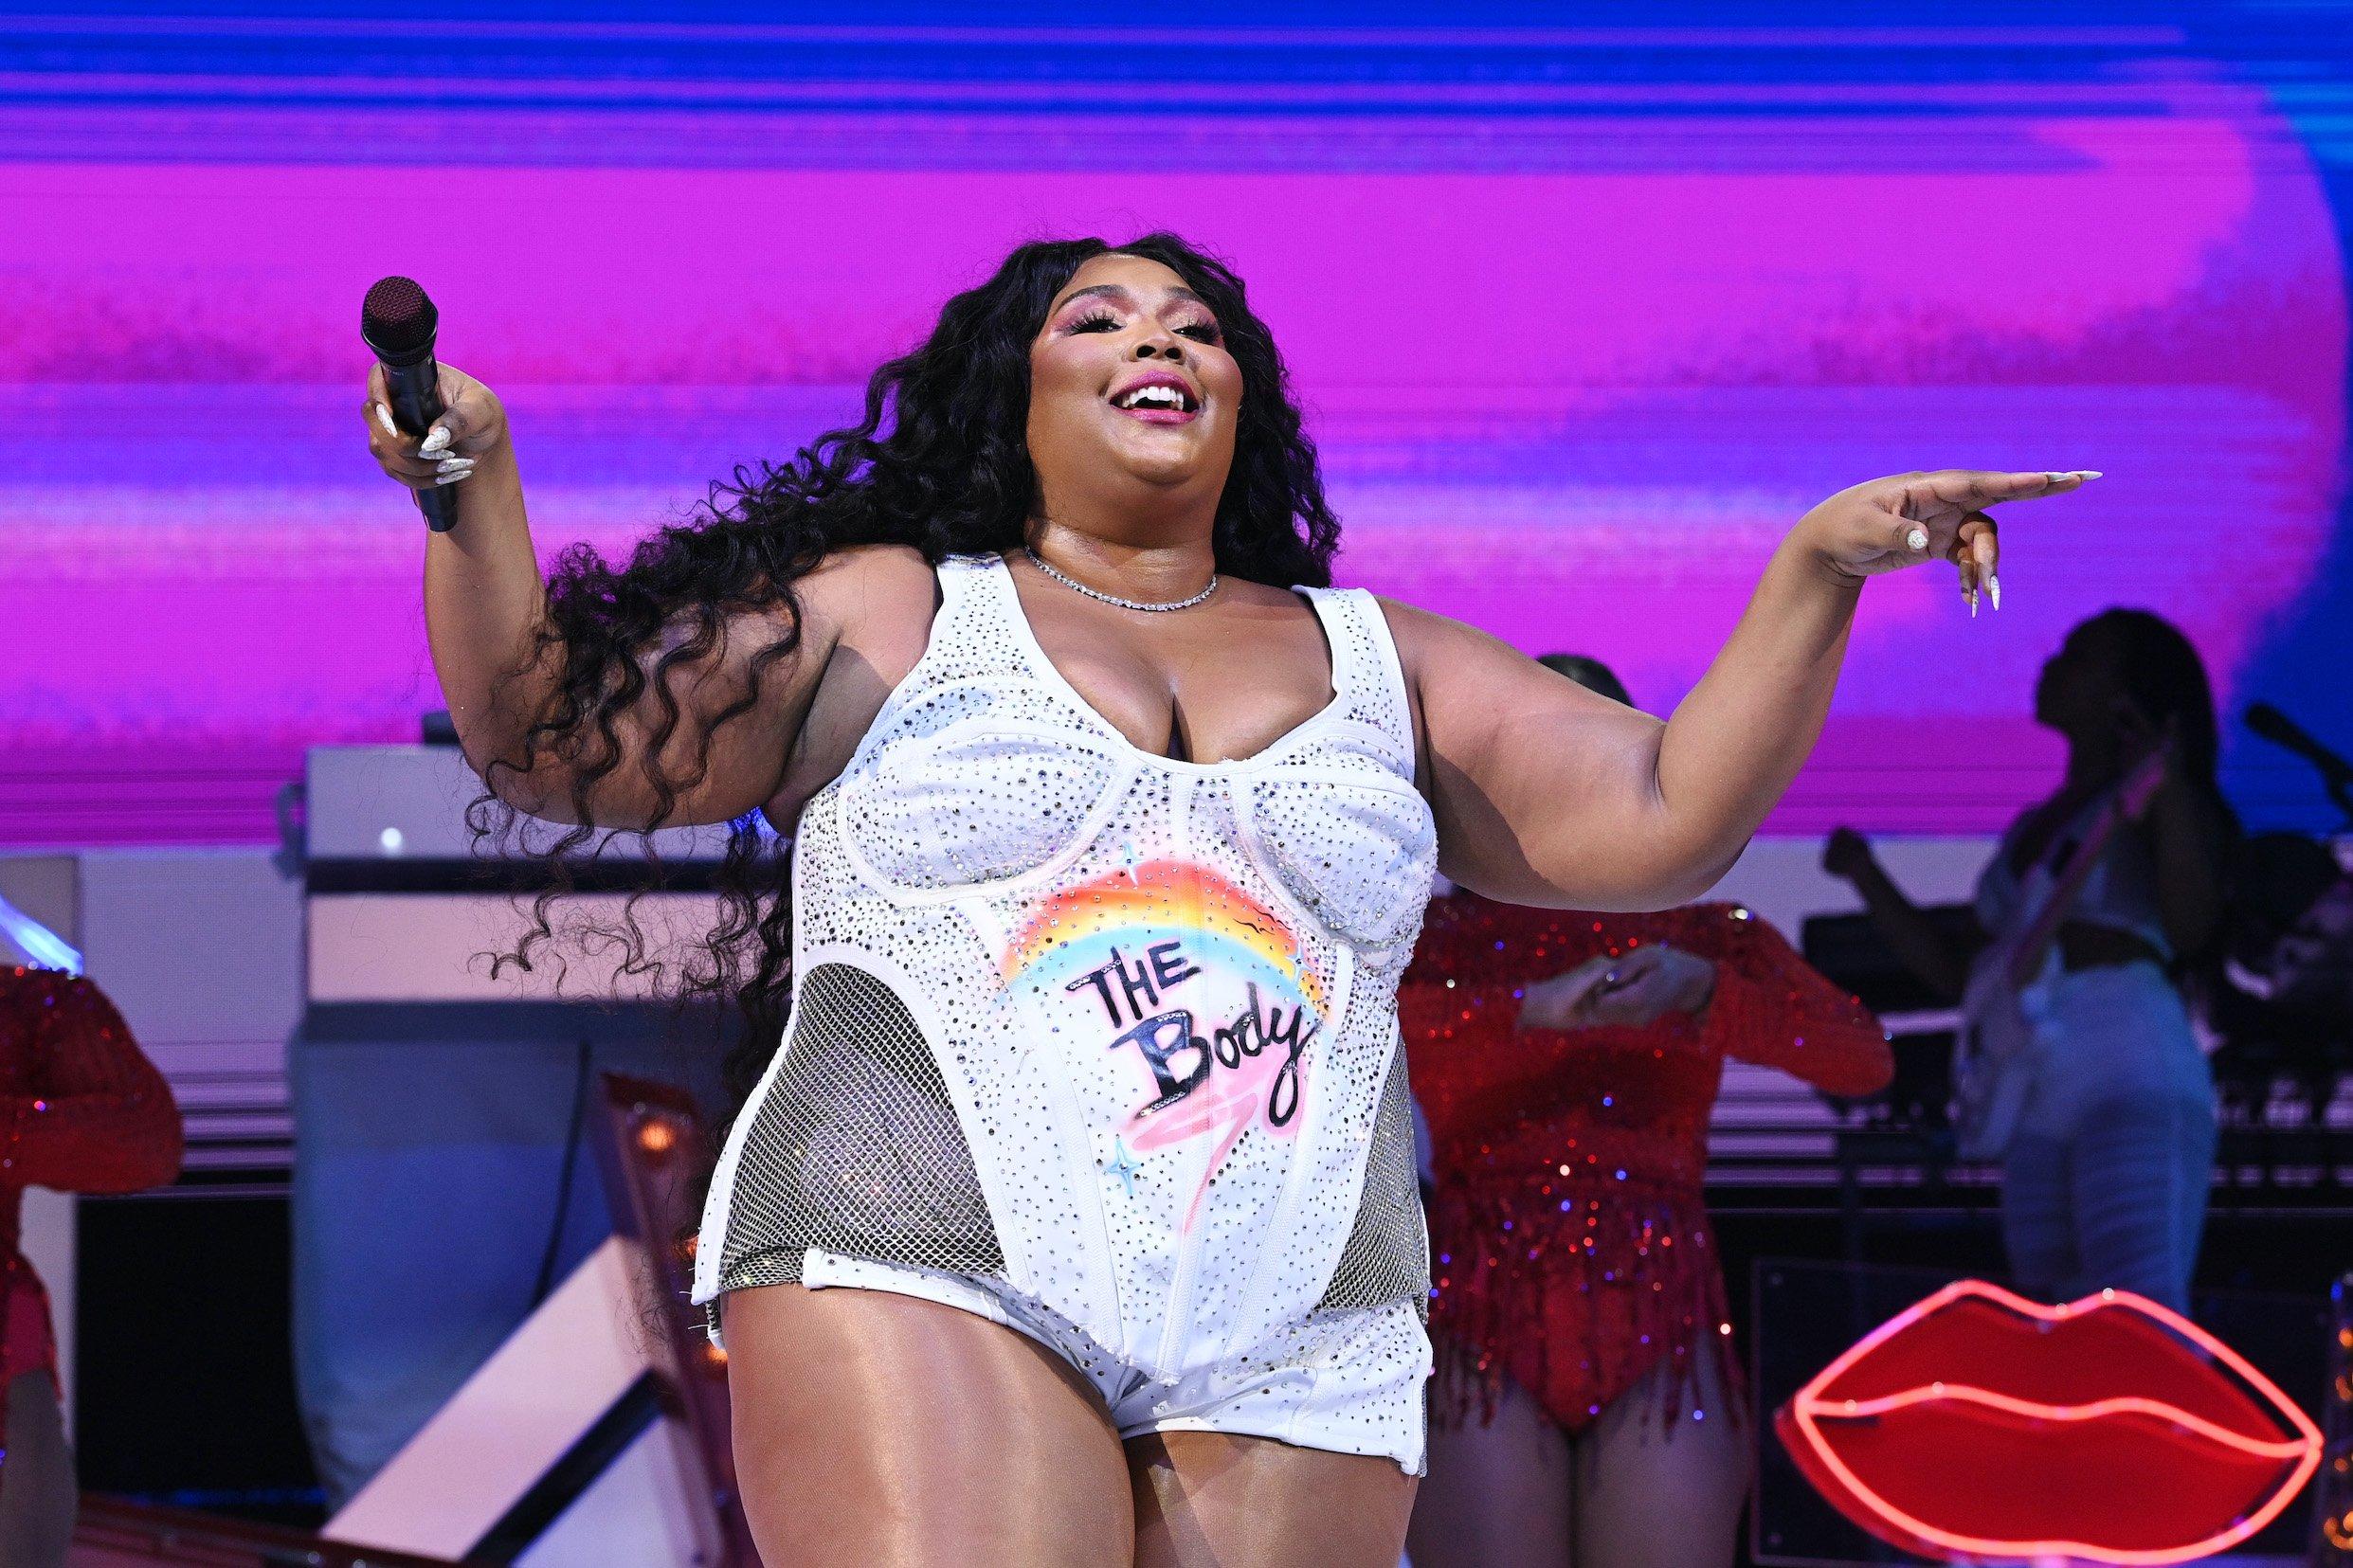 Grammy queen in the making: Rapper Lizzo defines beauty on own